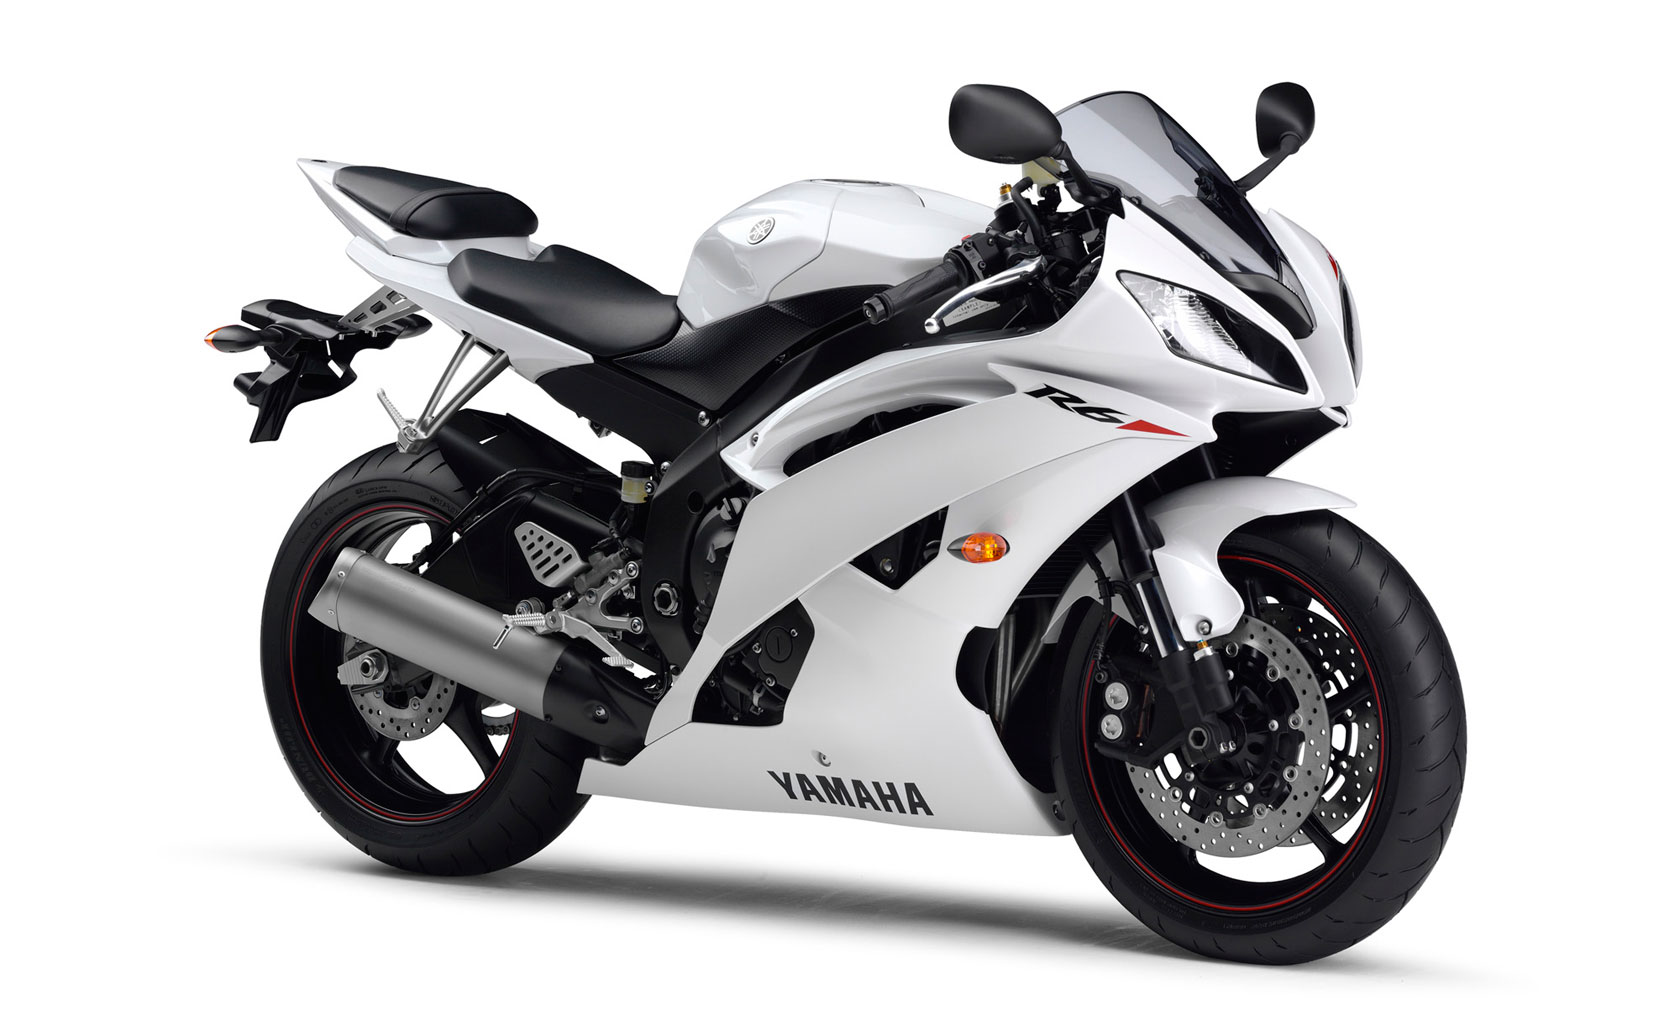 R6 Yamaha – A all about the R6 Yamaha motorcycle! – Just another WordPress site